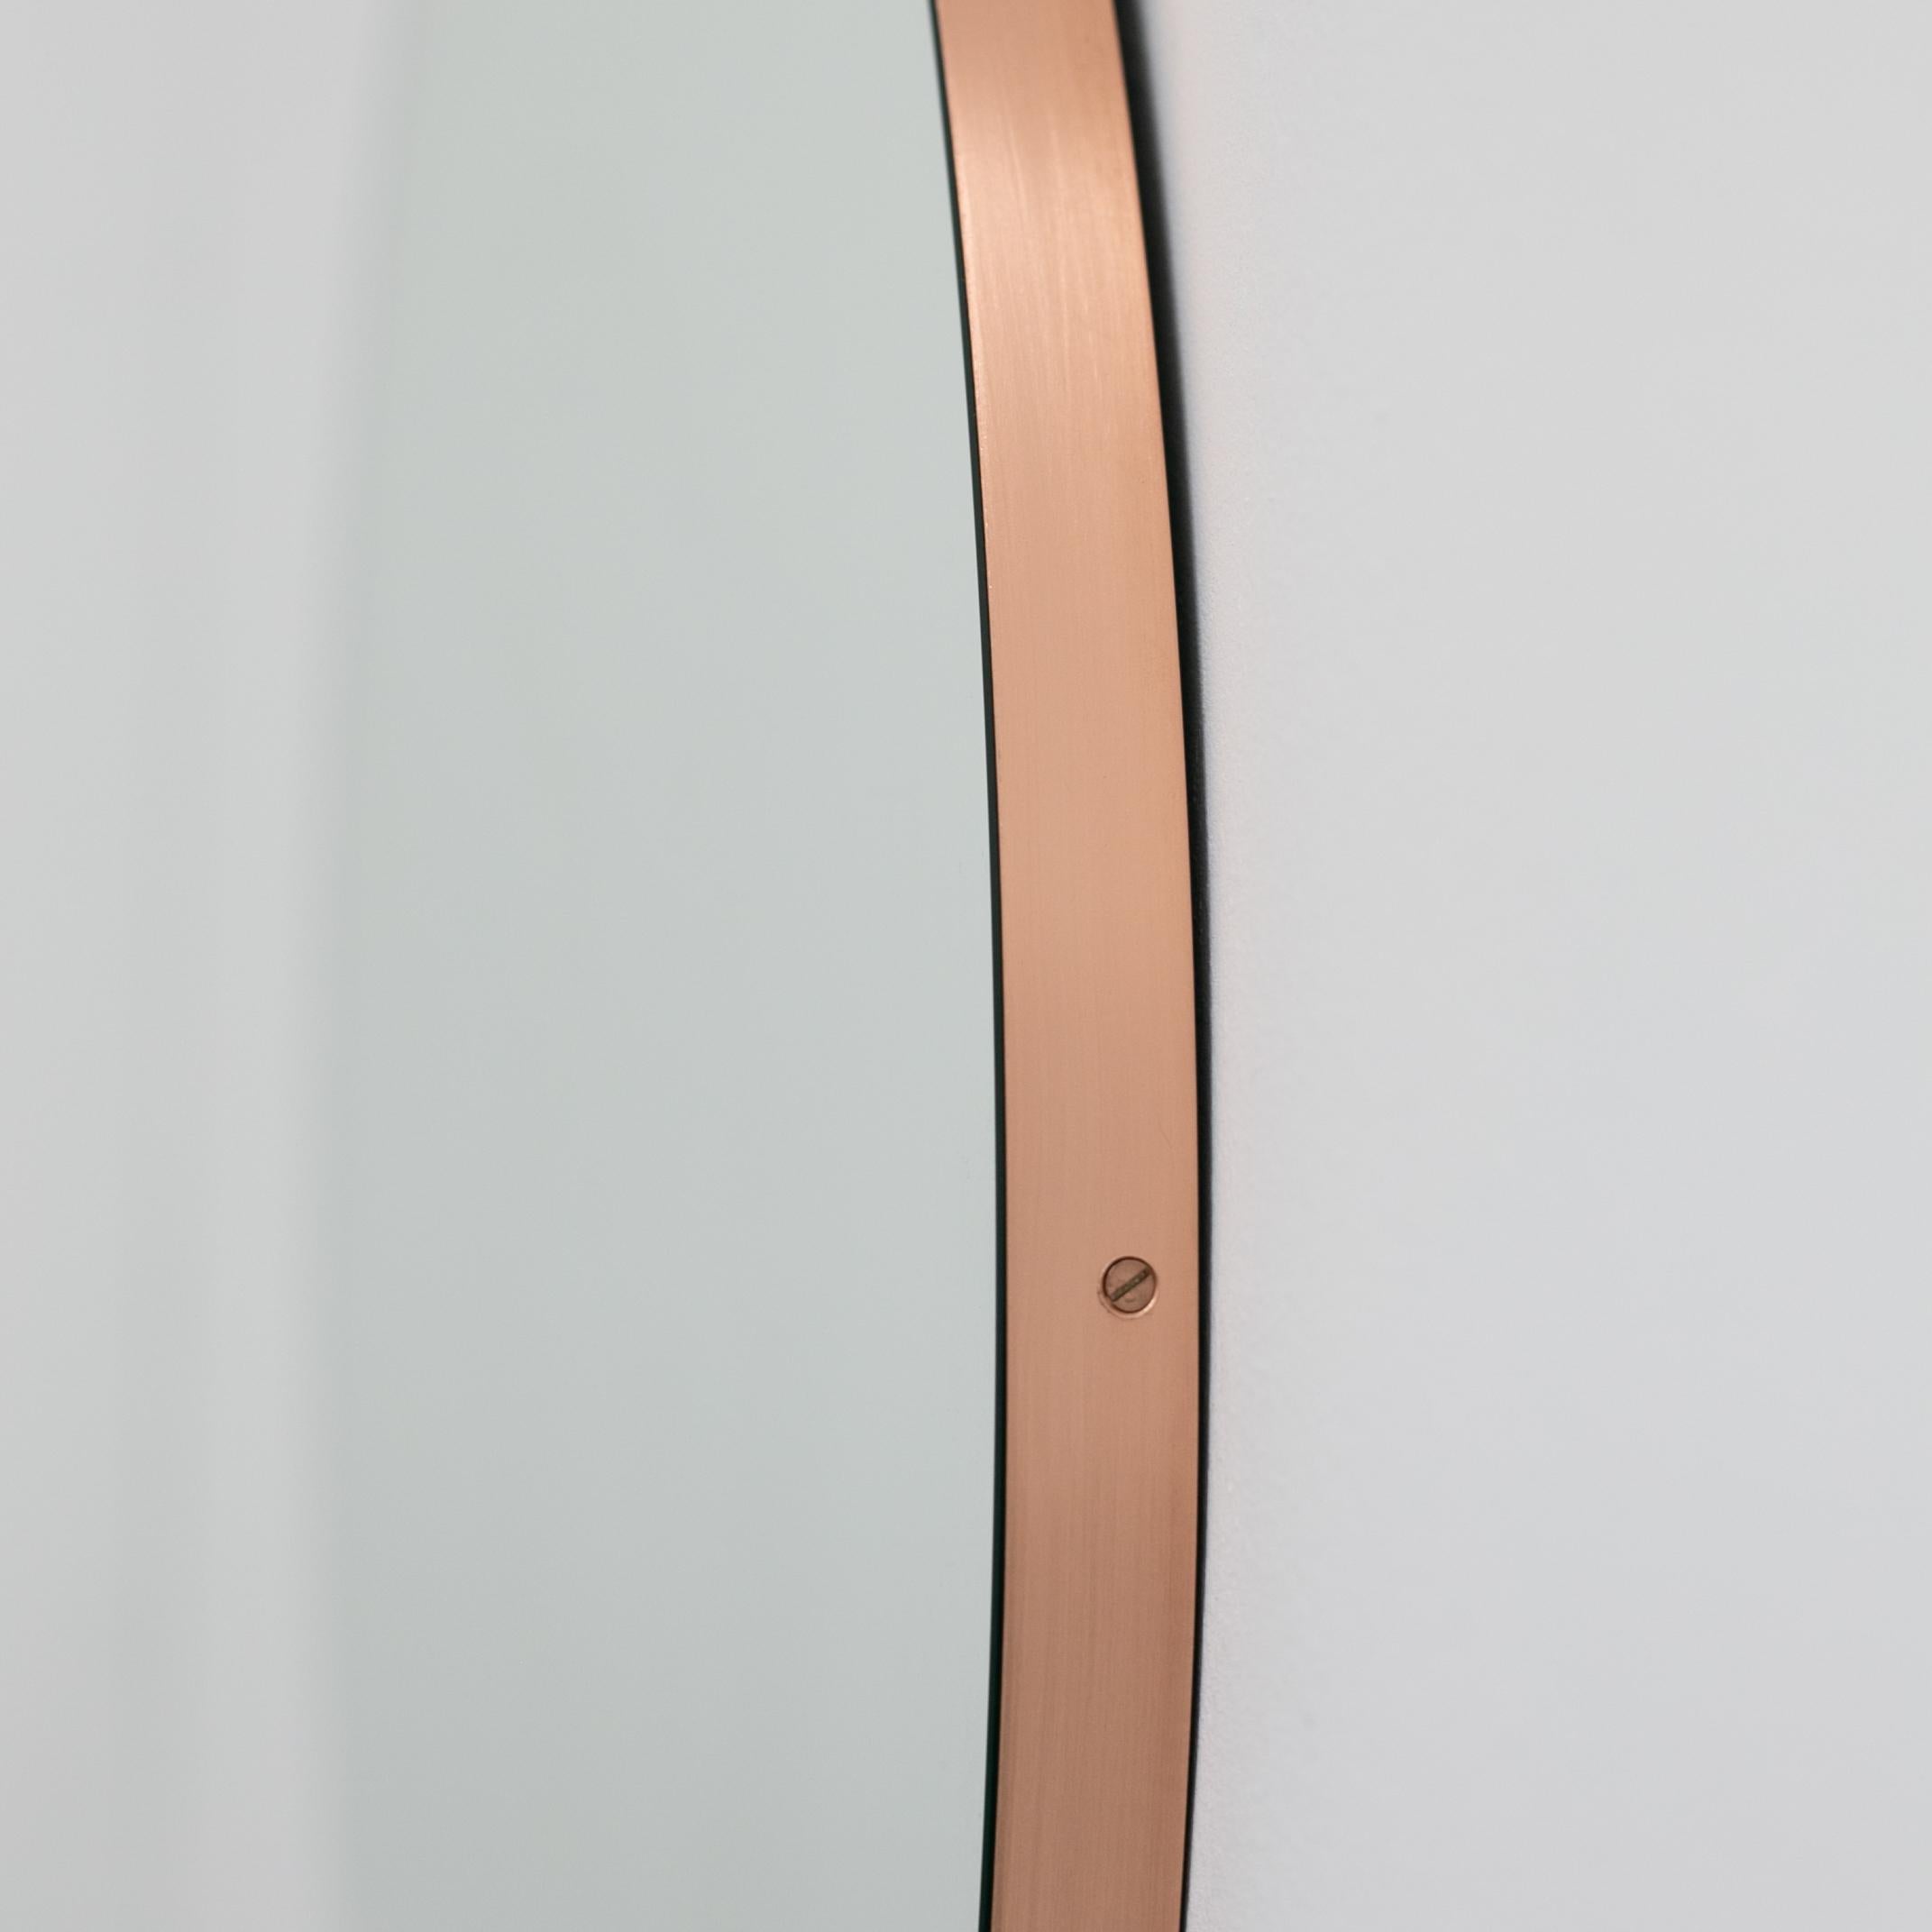 Orbis Round Contemporary Mirror with Copper Frame, Medium In New Condition For Sale In London, GB